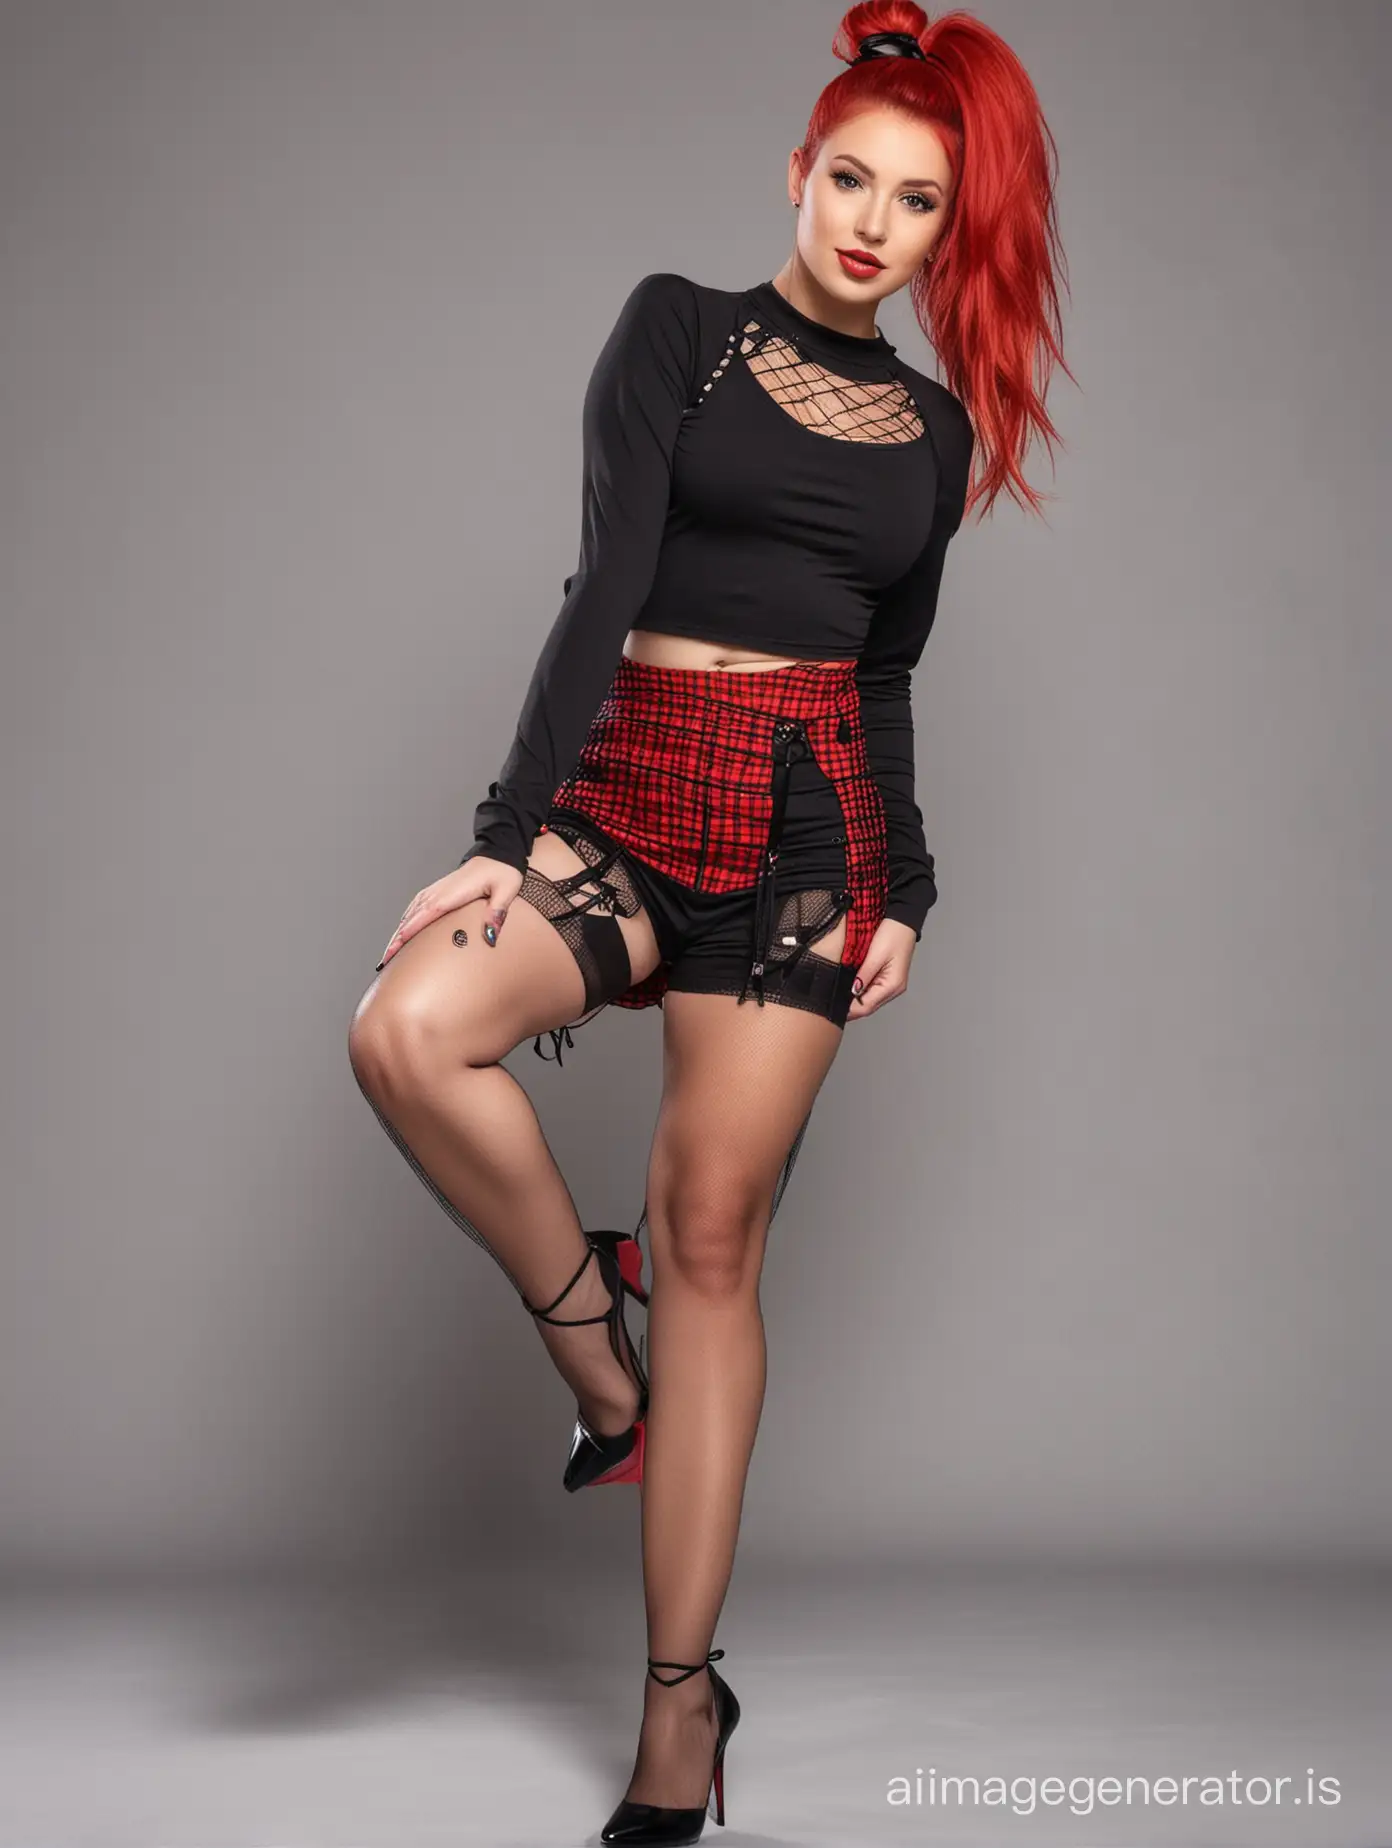 Stylish-Young-Woman-in-Mini-Black-Shorts-and-Fishnet-Stockings-with-Red-Ponytail